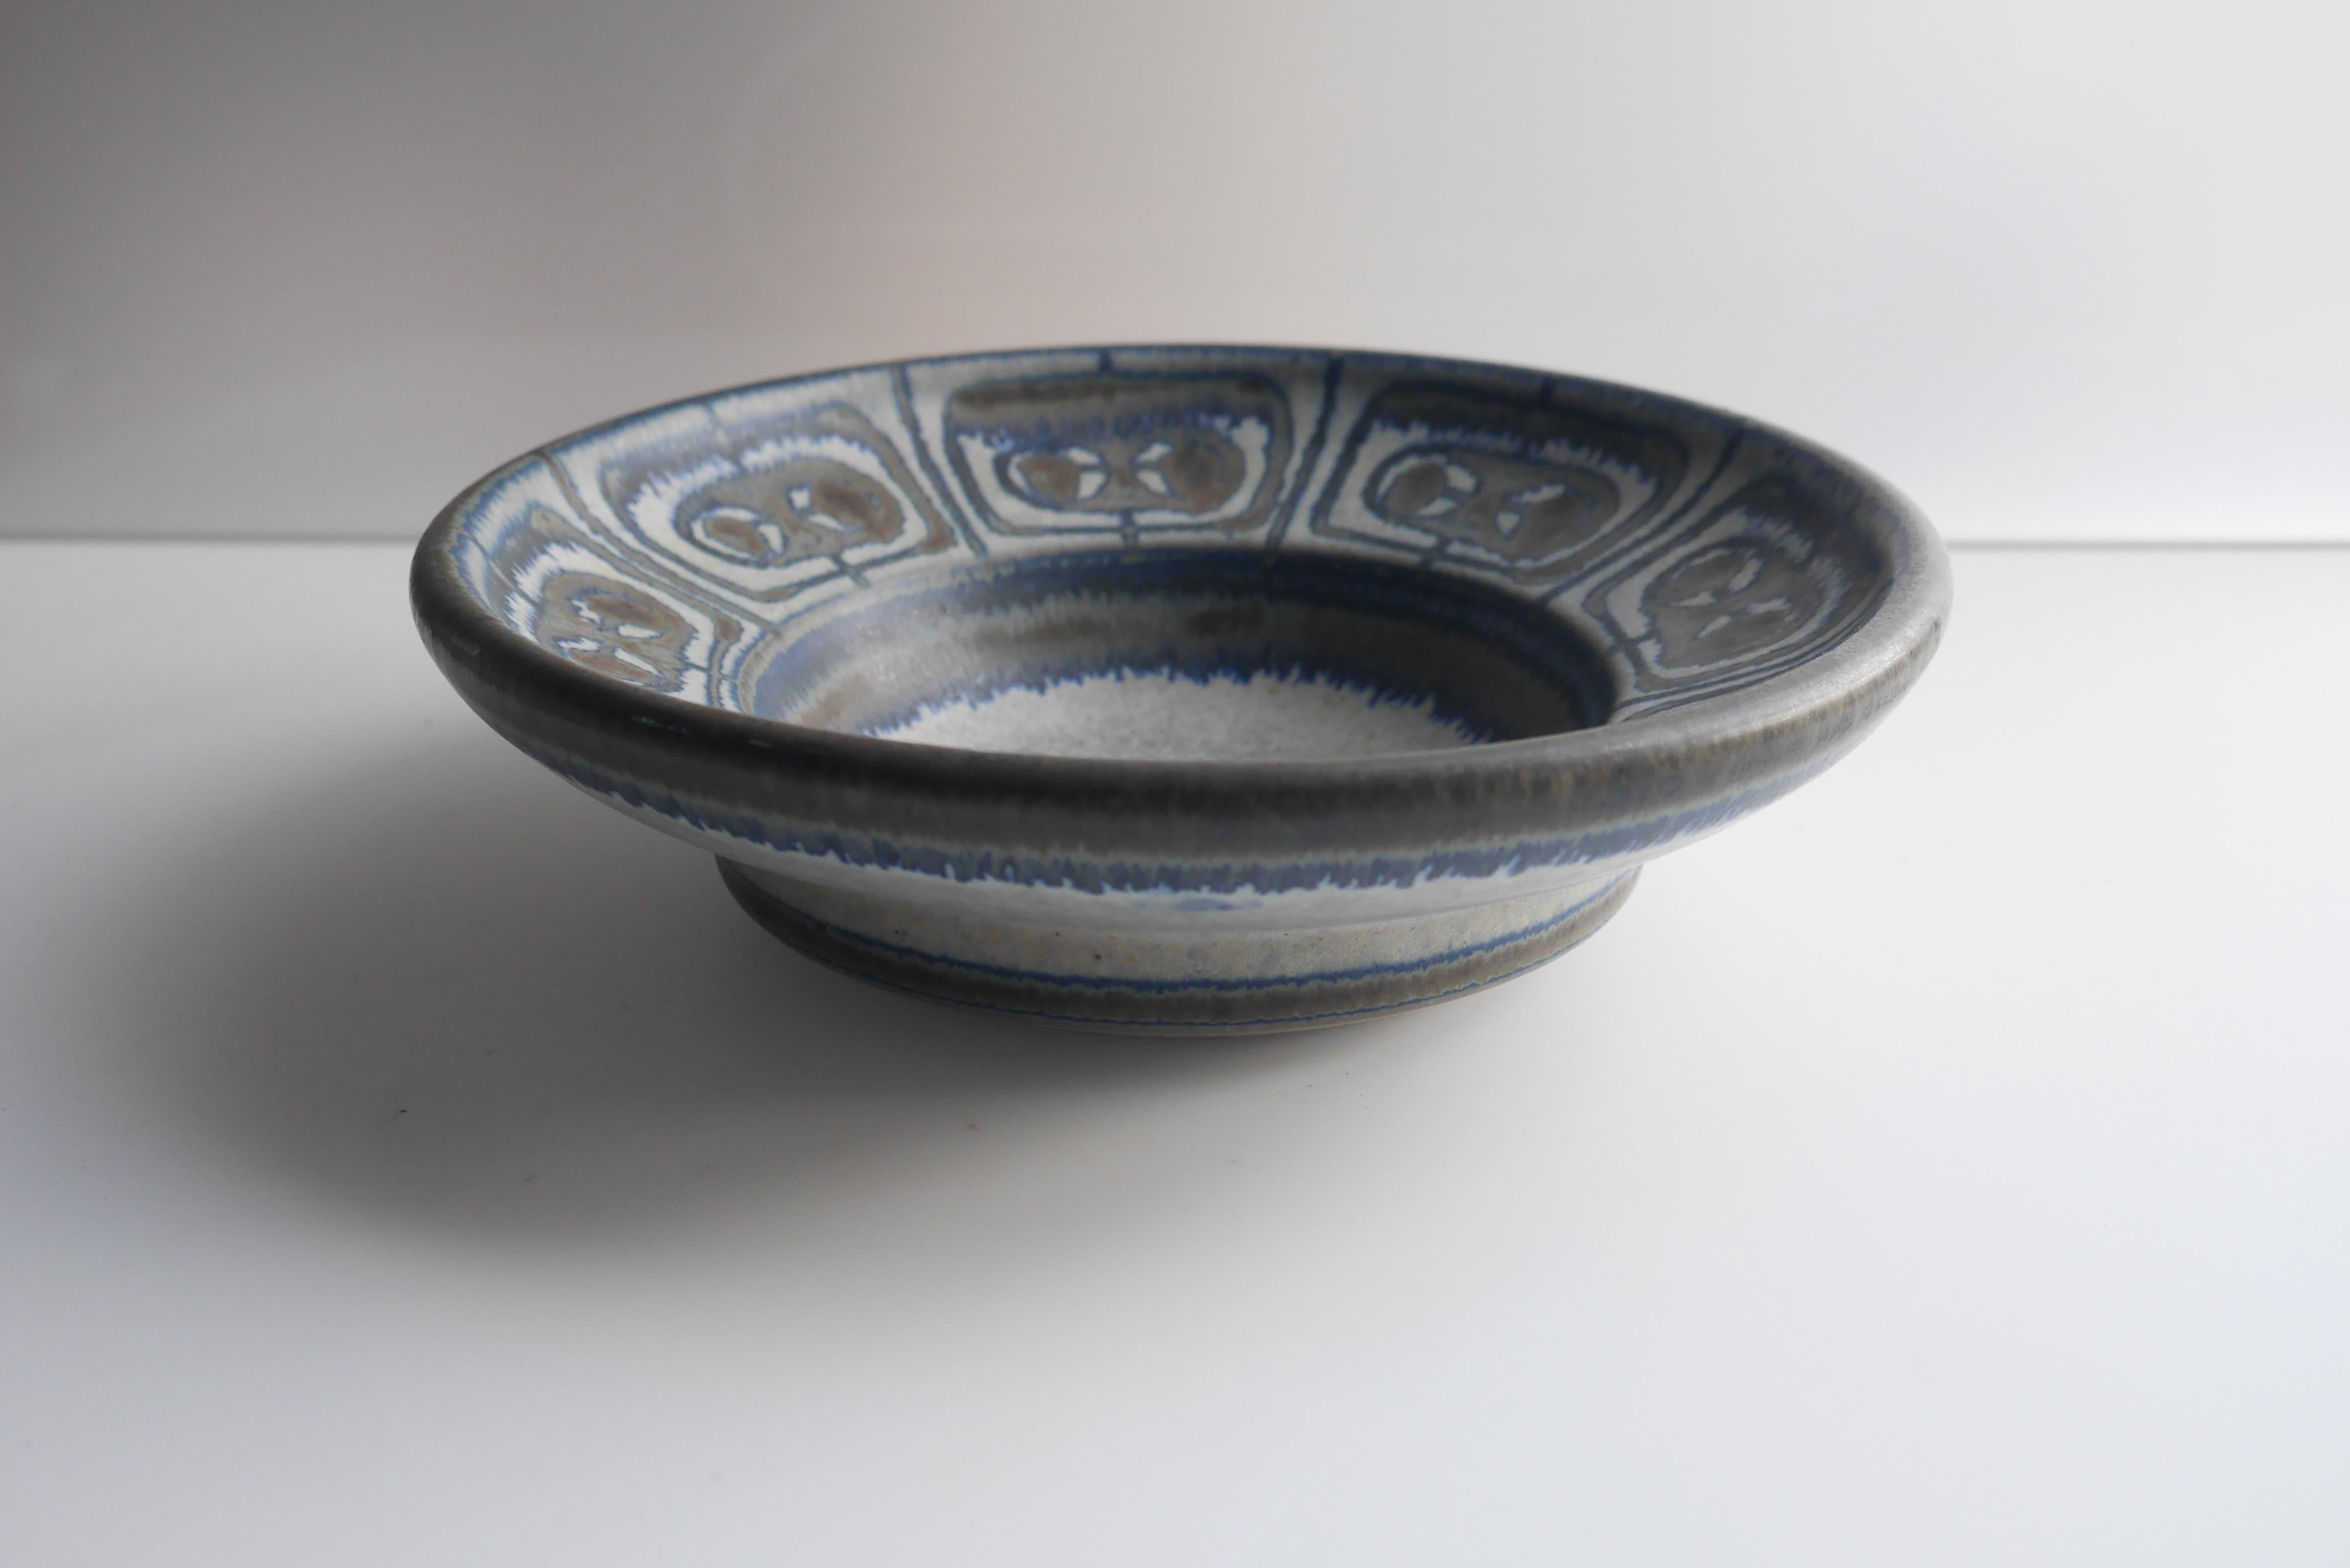 A beautiful shallow bowl or dish by Micheal Andersen for Bornholm ceramics in Denmark. Glazed pattern work around the rim of the piece in subtle matt colors. 

Michael Andersen and Sons Pottery known as (MAS), Bornholm Denmark. 

Michael Andersen &